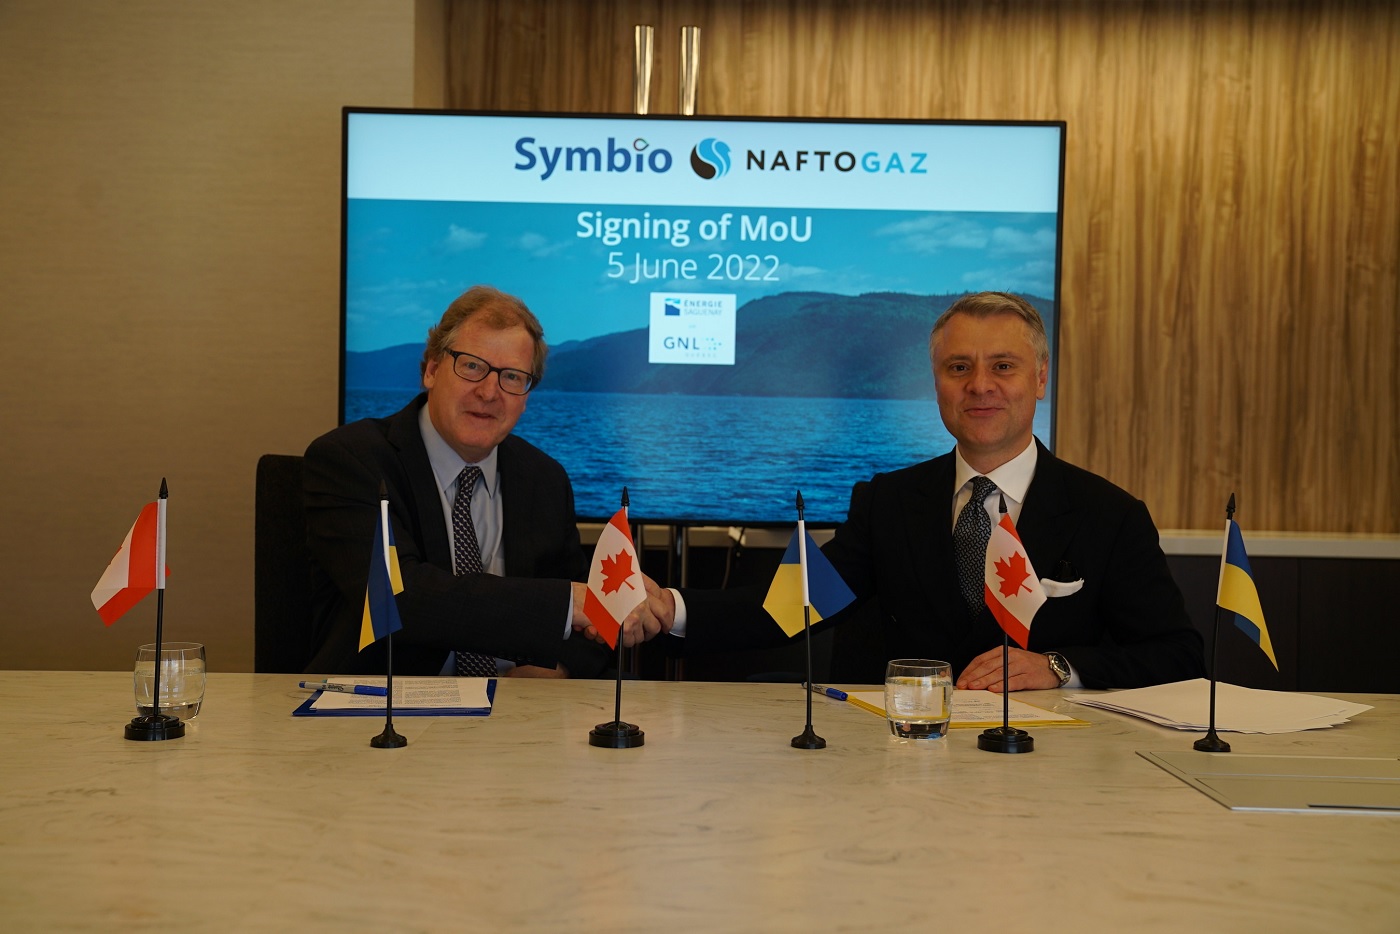 Naftogaz and Symbio enter into LNG and LH2 deal